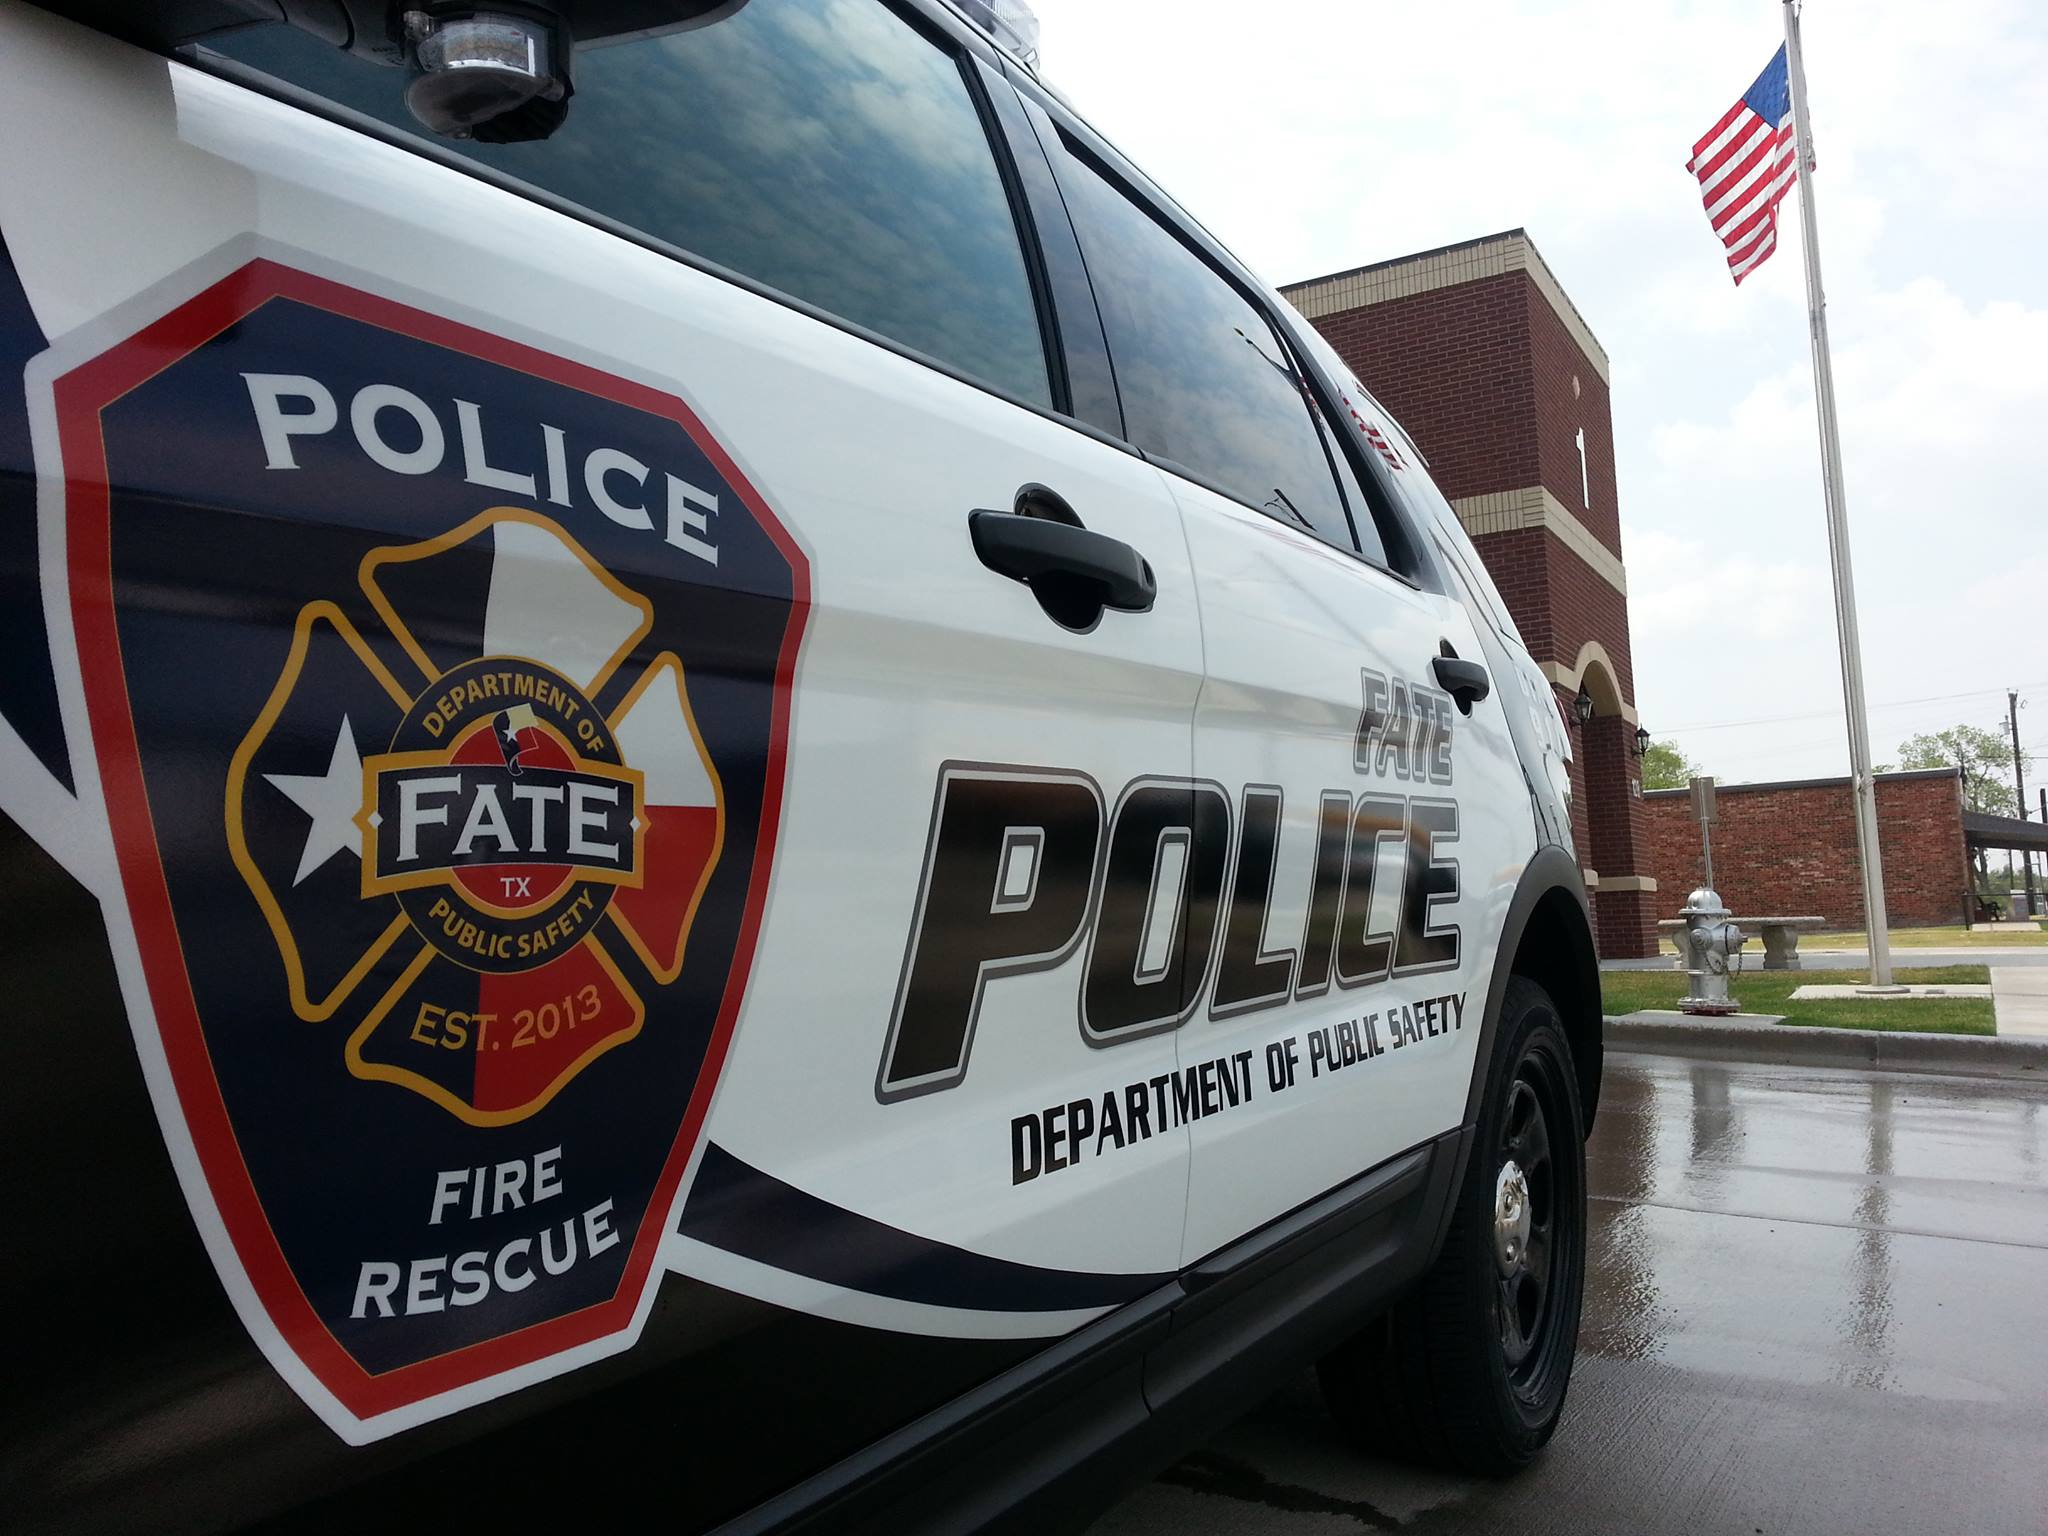 Public Safety | Fate, TX